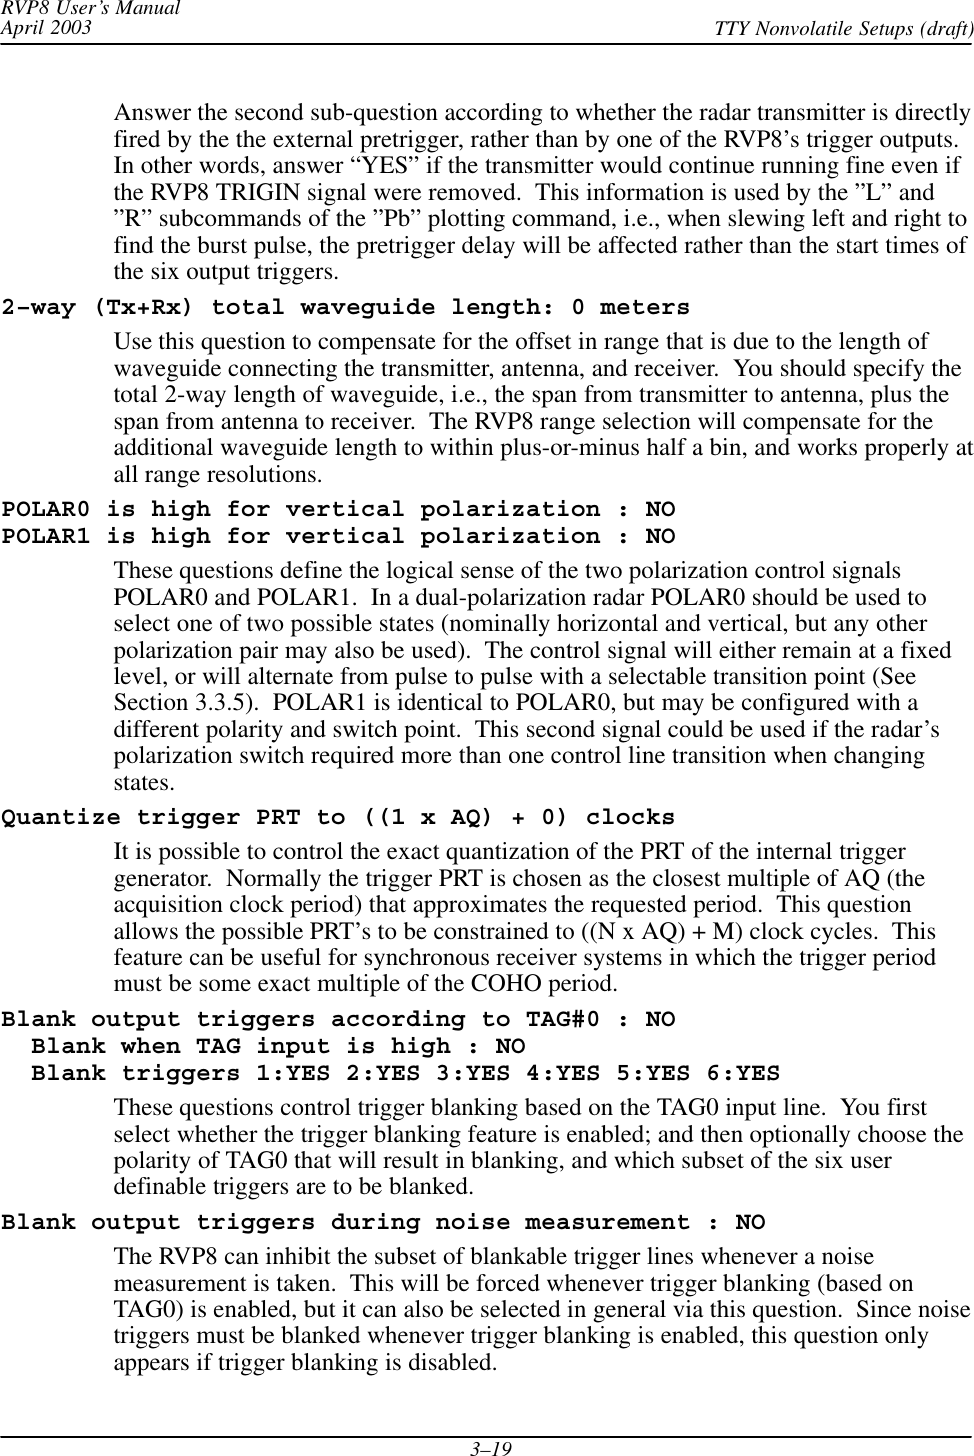 RVP8 User’s ManualApril 2003 TTY Nonvolatile Setups (draft)3–19Answer the second sub-question according to whether the radar transmitter is directlyfired by the the external pretrigger, rather than by one of the RVP8’s trigger outputs.In other words, answer “YES” if the transmitter would continue running fine even ifthe RVP8 TRIGIN signal were removed.  This information is used by the ”L” and”R” subcommands of the ”Pb” plotting command, i.e., when slewing left and right tofind the burst pulse, the pretrigger delay will be affected rather than the start times ofthe six output triggers.2–way (Tx+Rx) total waveguide length: 0 metersUse this question to compensate for the offset in range that is due to the length ofwaveguide connecting the transmitter, antenna, and receiver.  You should specify thetotal 2-way length of waveguide, i.e., the span from transmitter to antenna, plus thespan from antenna to receiver.  The RVP8 range selection will compensate for theadditional waveguide length to within plus-or-minus half a bin, and works properly atall range resolutions.POLAR0 is high for vertical polarization : NOPOLAR1 is high for vertical polarization : NOThese questions define the logical sense of the two polarization control signalsPOLAR0 and POLAR1.  In a dual-polarization radar POLAR0 should be used toselect one of two possible states (nominally horizontal and vertical, but any otherpolarization pair may also be used).  The control signal will either remain at a fixedlevel, or will alternate from pulse to pulse with a selectable transition point (SeeSection 3.3.5).  POLAR1 is identical to POLAR0, but may be configured with adifferent polarity and switch point.  This second signal could be used if the radar’spolarization switch required more than one control line transition when changingstates.Quantize trigger PRT to ((1 x AQ) + 0) clocksIt is possible to control the exact quantization of the PRT of the internal triggergenerator.  Normally the trigger PRT is chosen as the closest multiple of AQ (theacquisition clock period) that approximates the requested period.  This questionallows the possible PRT’s to be constrained to ((N x AQ) + M) clock cycles.  Thisfeature can be useful for synchronous receiver systems in which the trigger periodmust be some exact multiple of the COHO period.Blank output triggers according to TAG#0 : NO  Blank when TAG input is high : NO  Blank triggers 1:YES 2:YES 3:YES 4:YES 5:YES 6:YESThese questions control trigger blanking based on the TAG0 input line.  You firstselect whether the trigger blanking feature is enabled; and then optionally choose thepolarity of TAG0 that will result in blanking, and which subset of the six userdefinable triggers are to be blanked.Blank output triggers during noise measurement : NOThe RVP8 can inhibit the subset of blankable trigger lines whenever a noisemeasurement is taken.  This will be forced whenever trigger blanking (based onTAG0) is enabled, but it can also be selected in general via this question.  Since noisetriggers must be blanked whenever trigger blanking is enabled, this question onlyappears if trigger blanking is disabled.